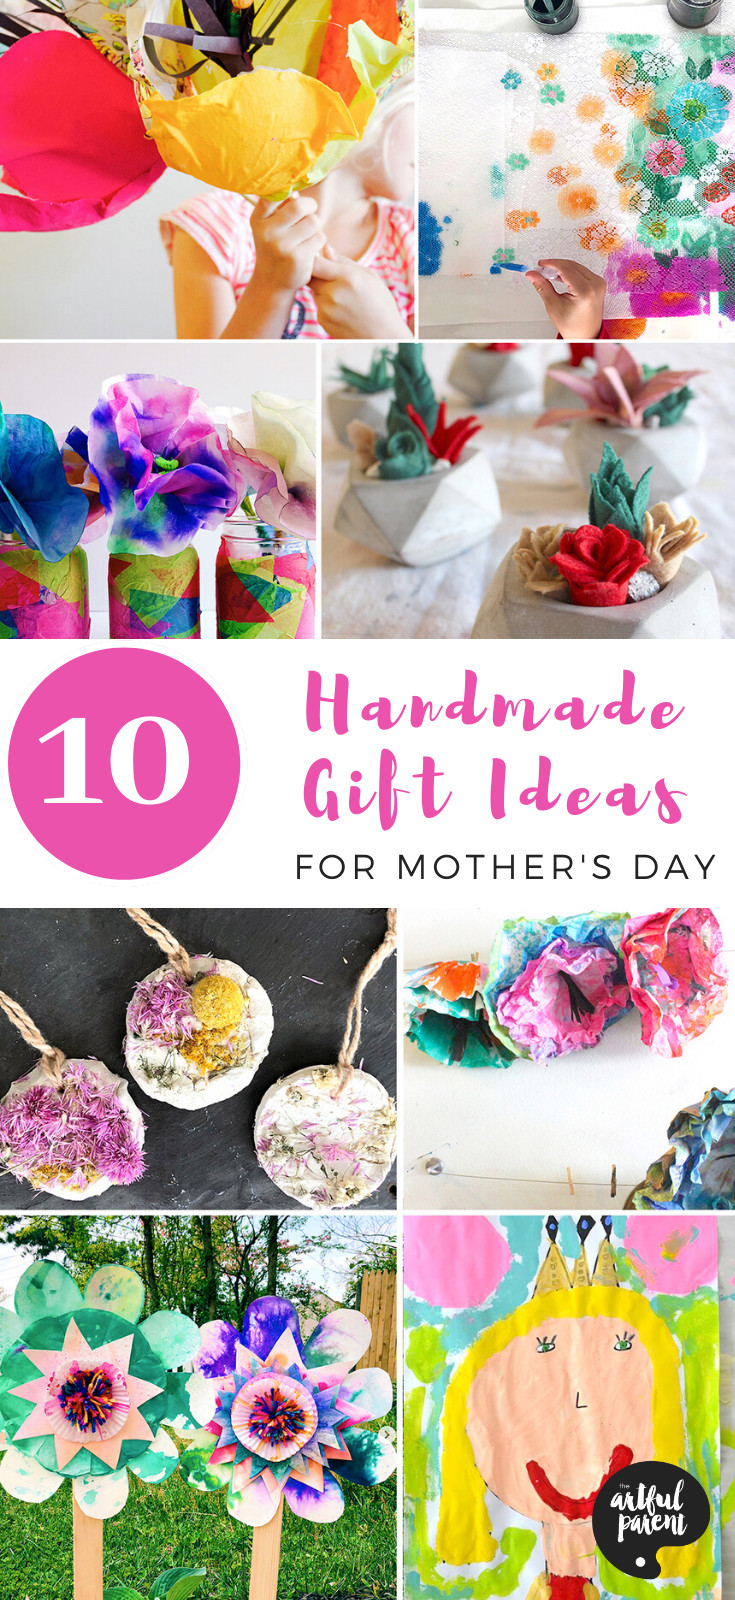 Valentines Gift Ideas For Mom
 10 Creative Handmade Gift Ideas for Mom this Mother s Day